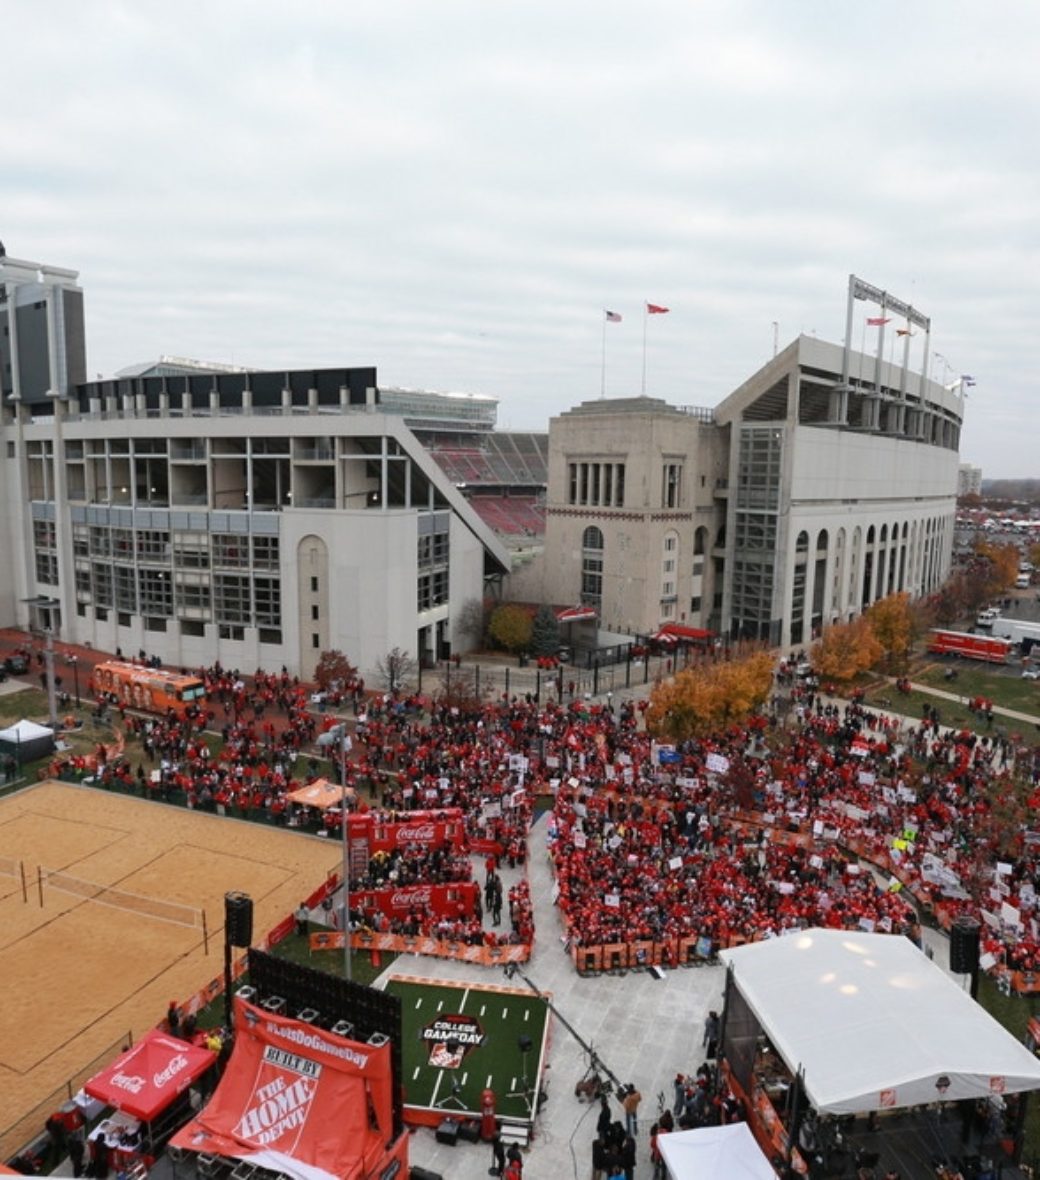 The crowd for the five-hour show at Ohio State was “epic,” Gaiero said. (Allen Kee/ESPN Images)